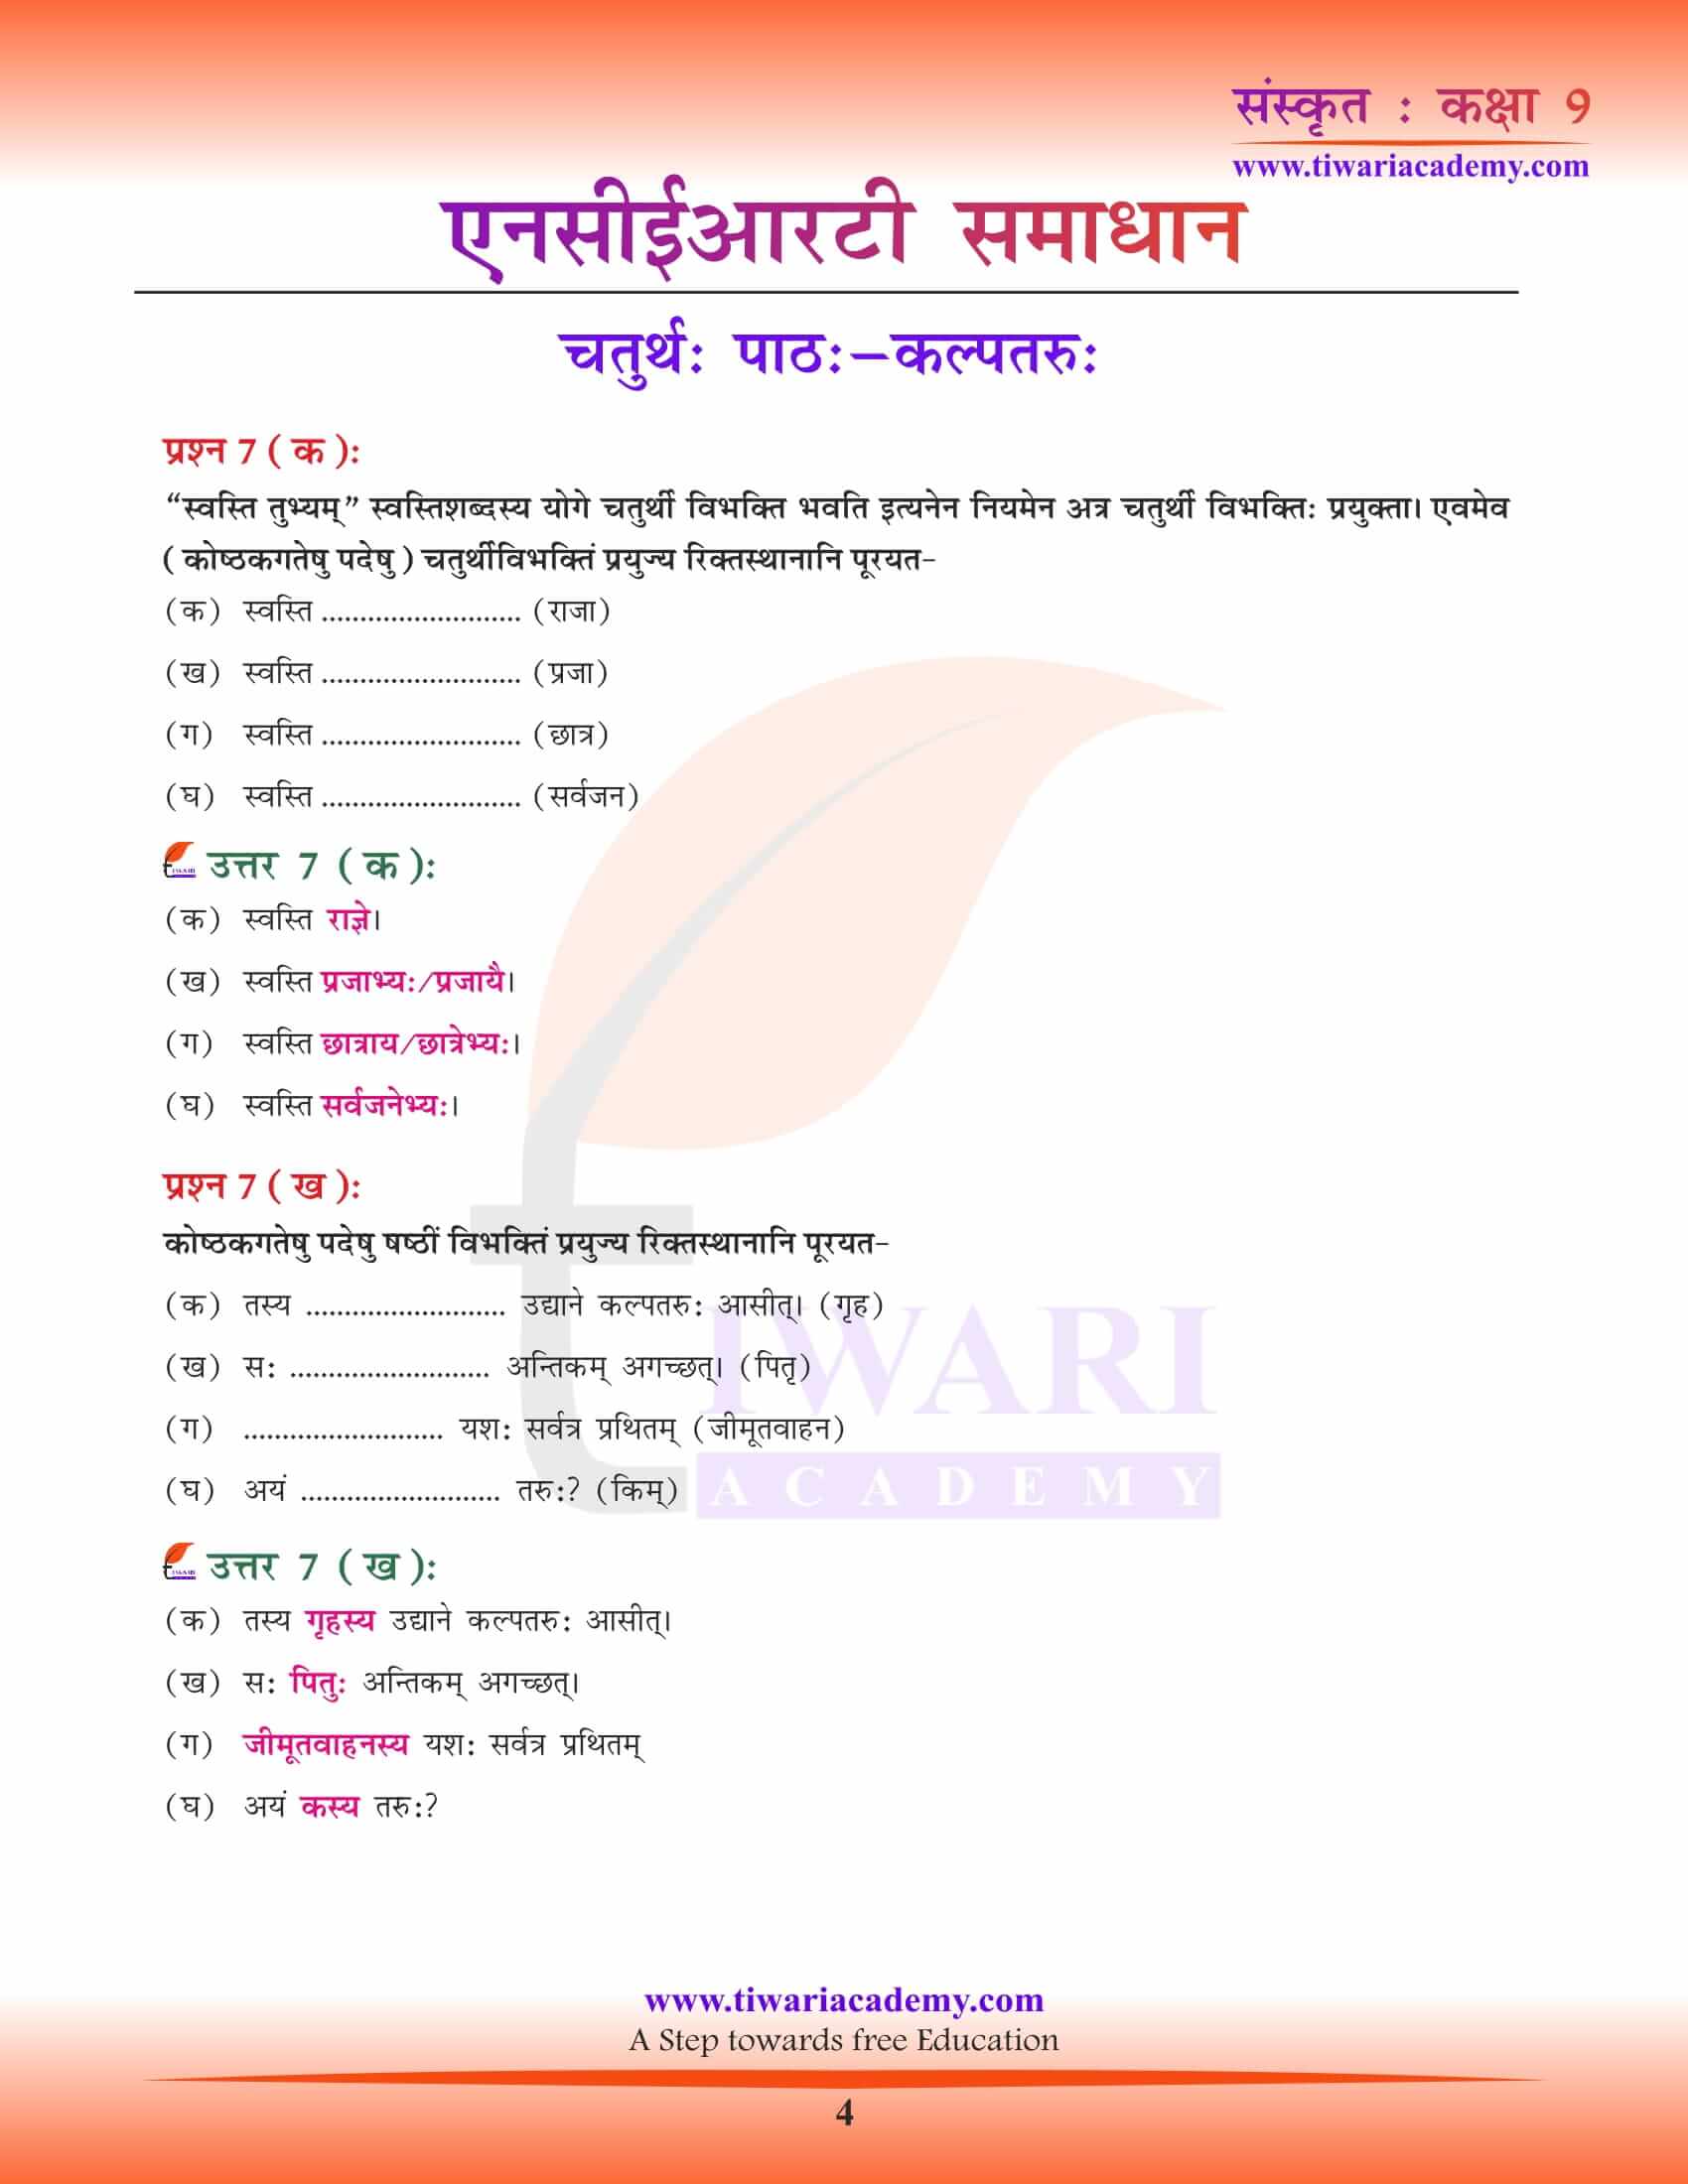 NCERT Solutions for Class 9 Sanskrit Chapter 4 all answers